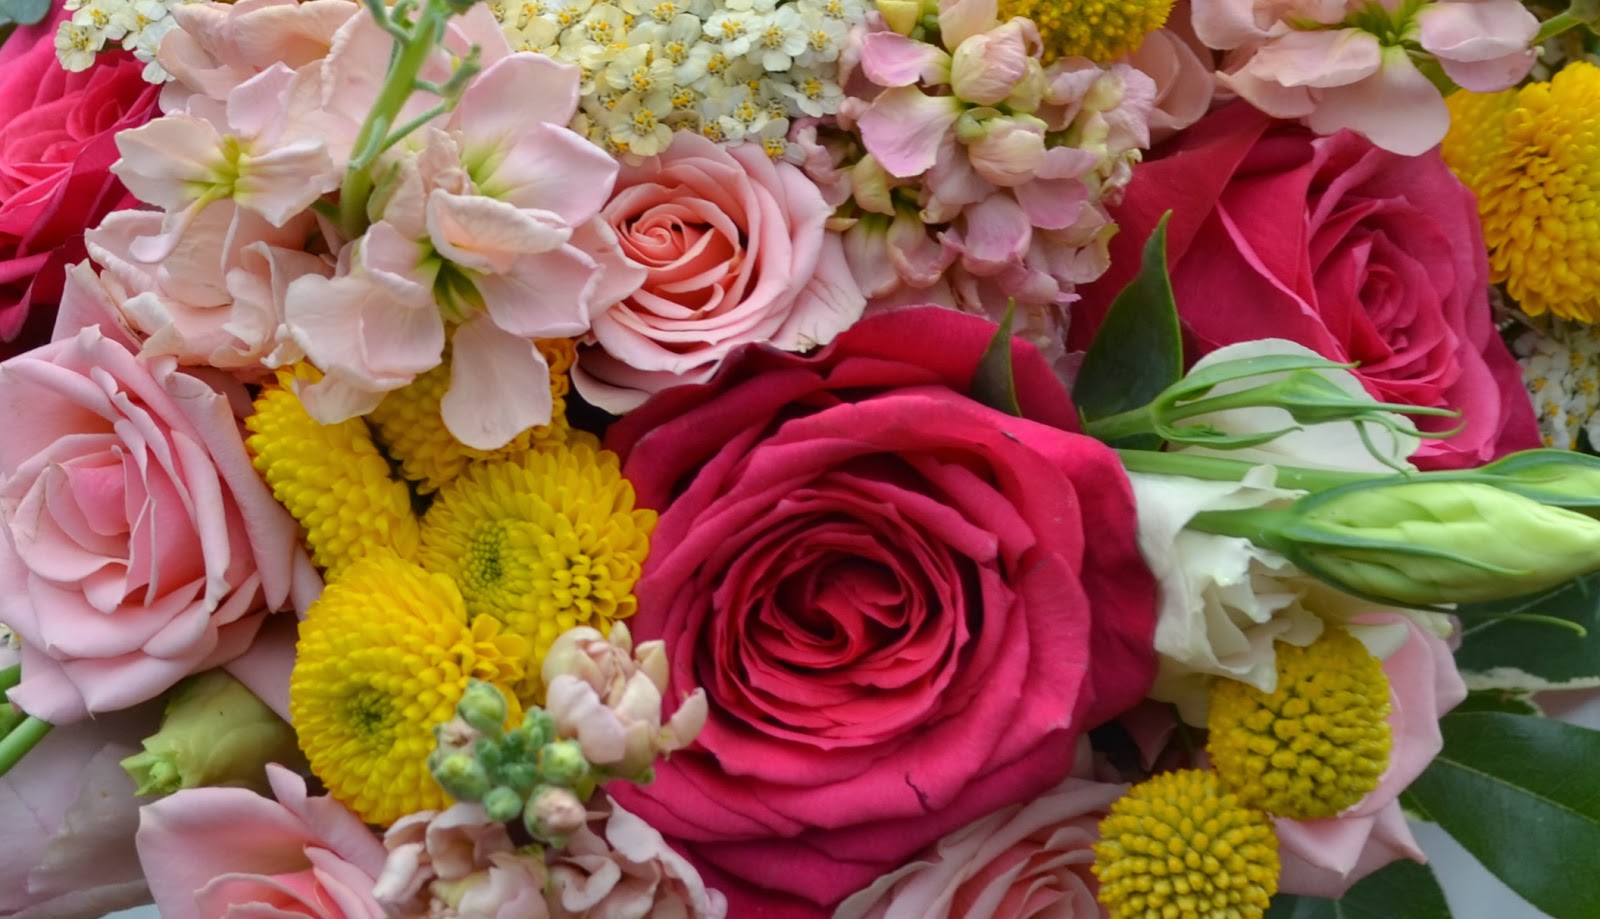 Wedding Flowers from Springwell: Warm Peaches, Pinks and Yellows for ...